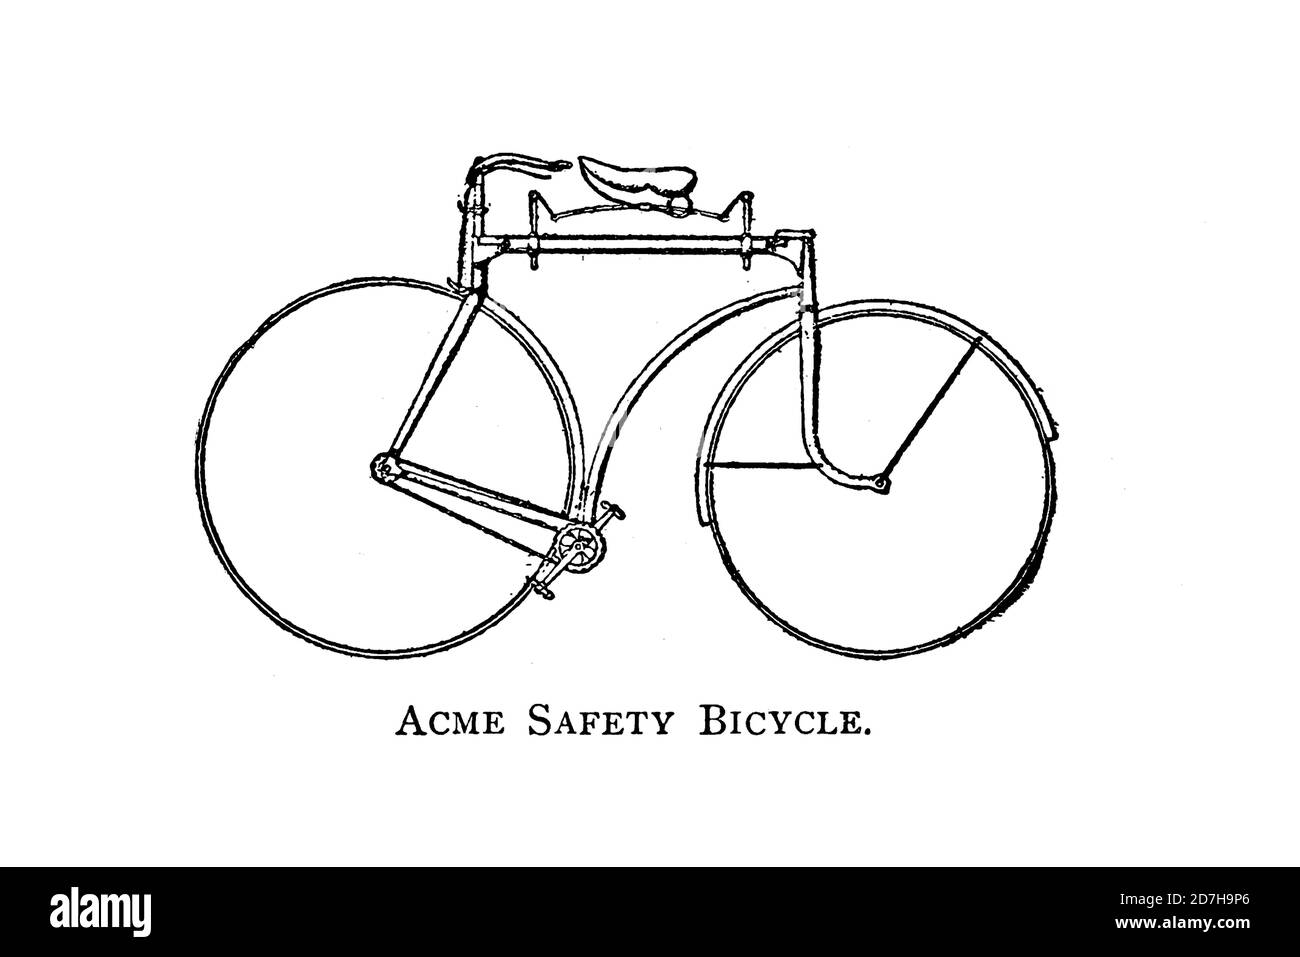 Acme Safety Bicycle with a chain powering the front wheel and steering by the rear wheel Manufactured by Acme Machine Company From Wheels and Wheeling Stock Photo